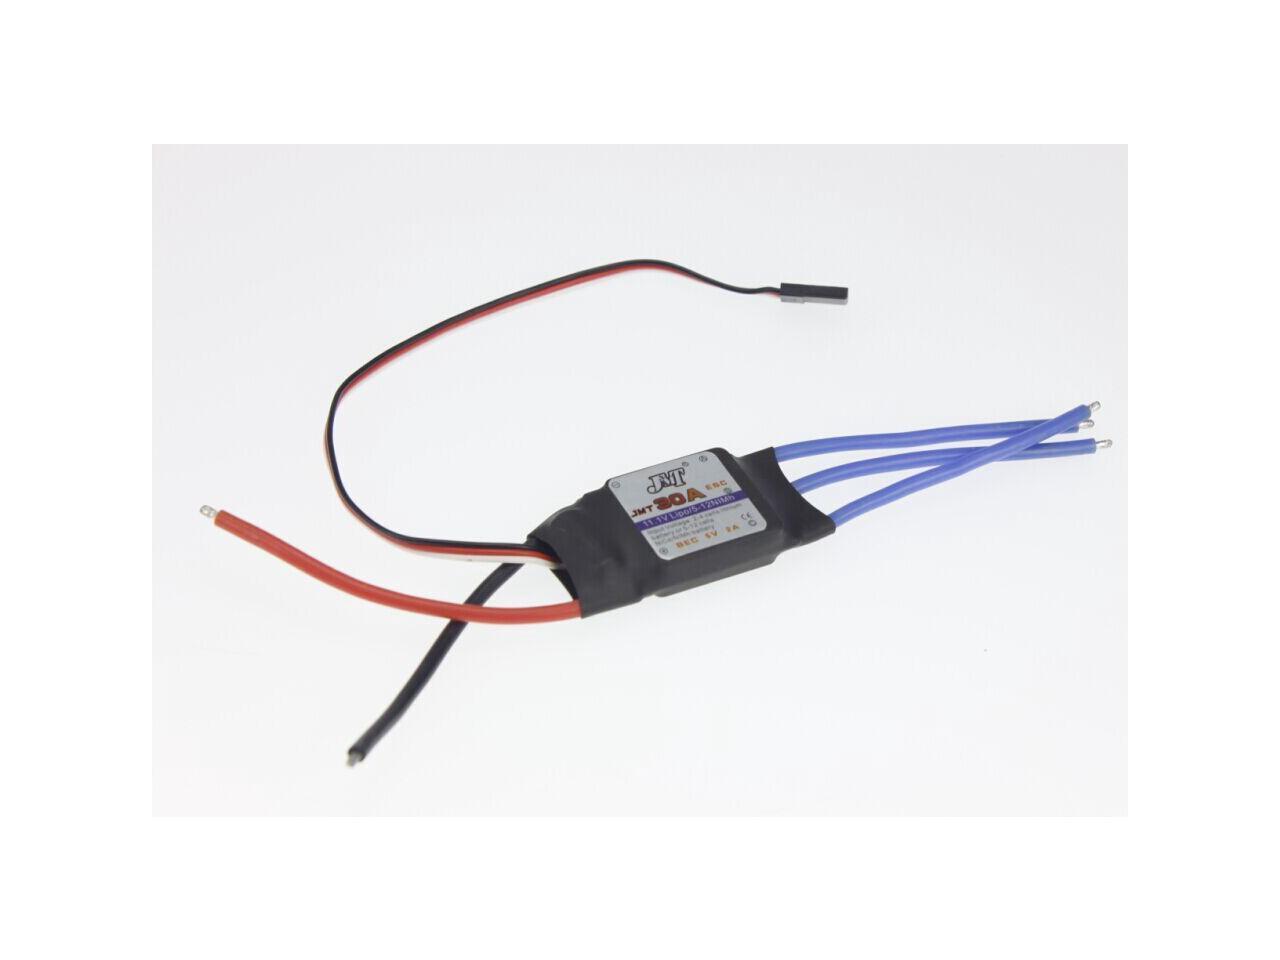 NEW 40A Brushless ESC Motors Speed Controller RC Part for trex 450 Helicopter E